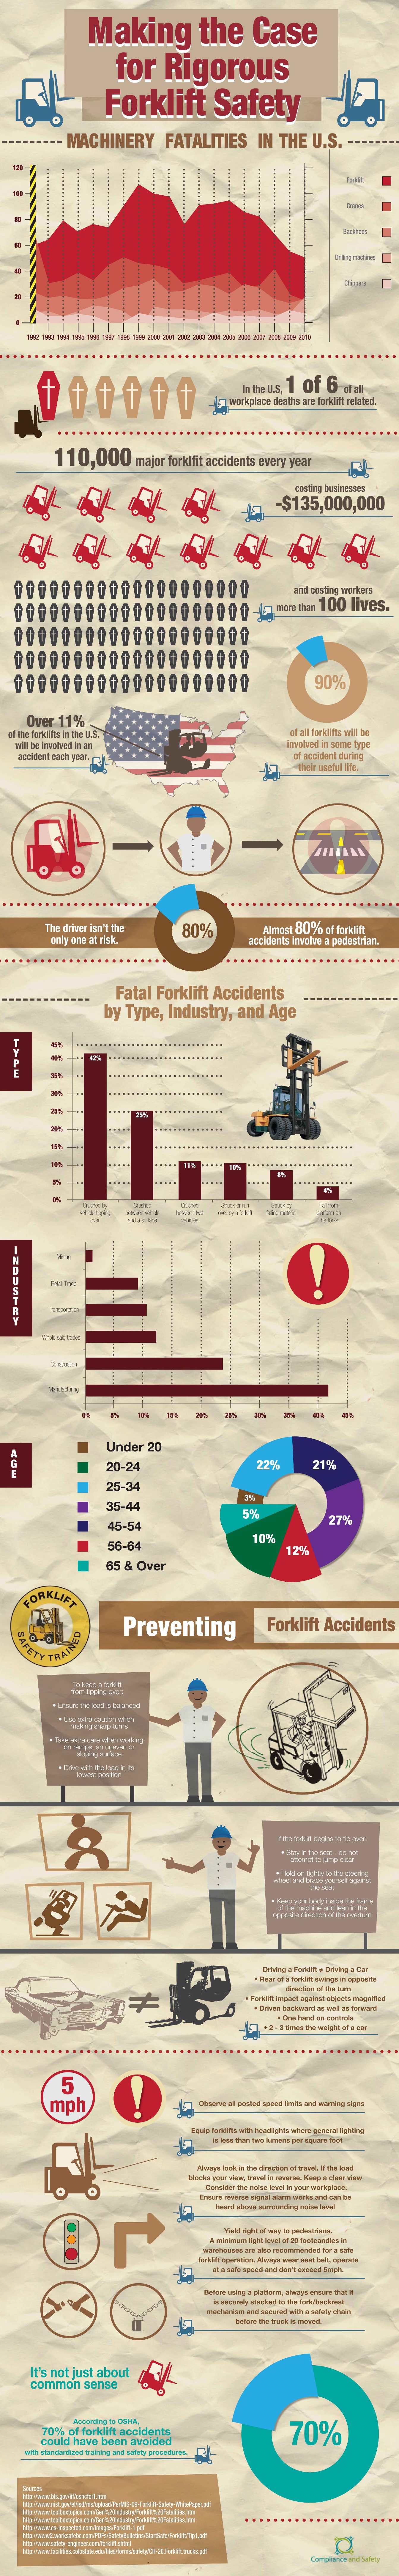 forklift safety infographic